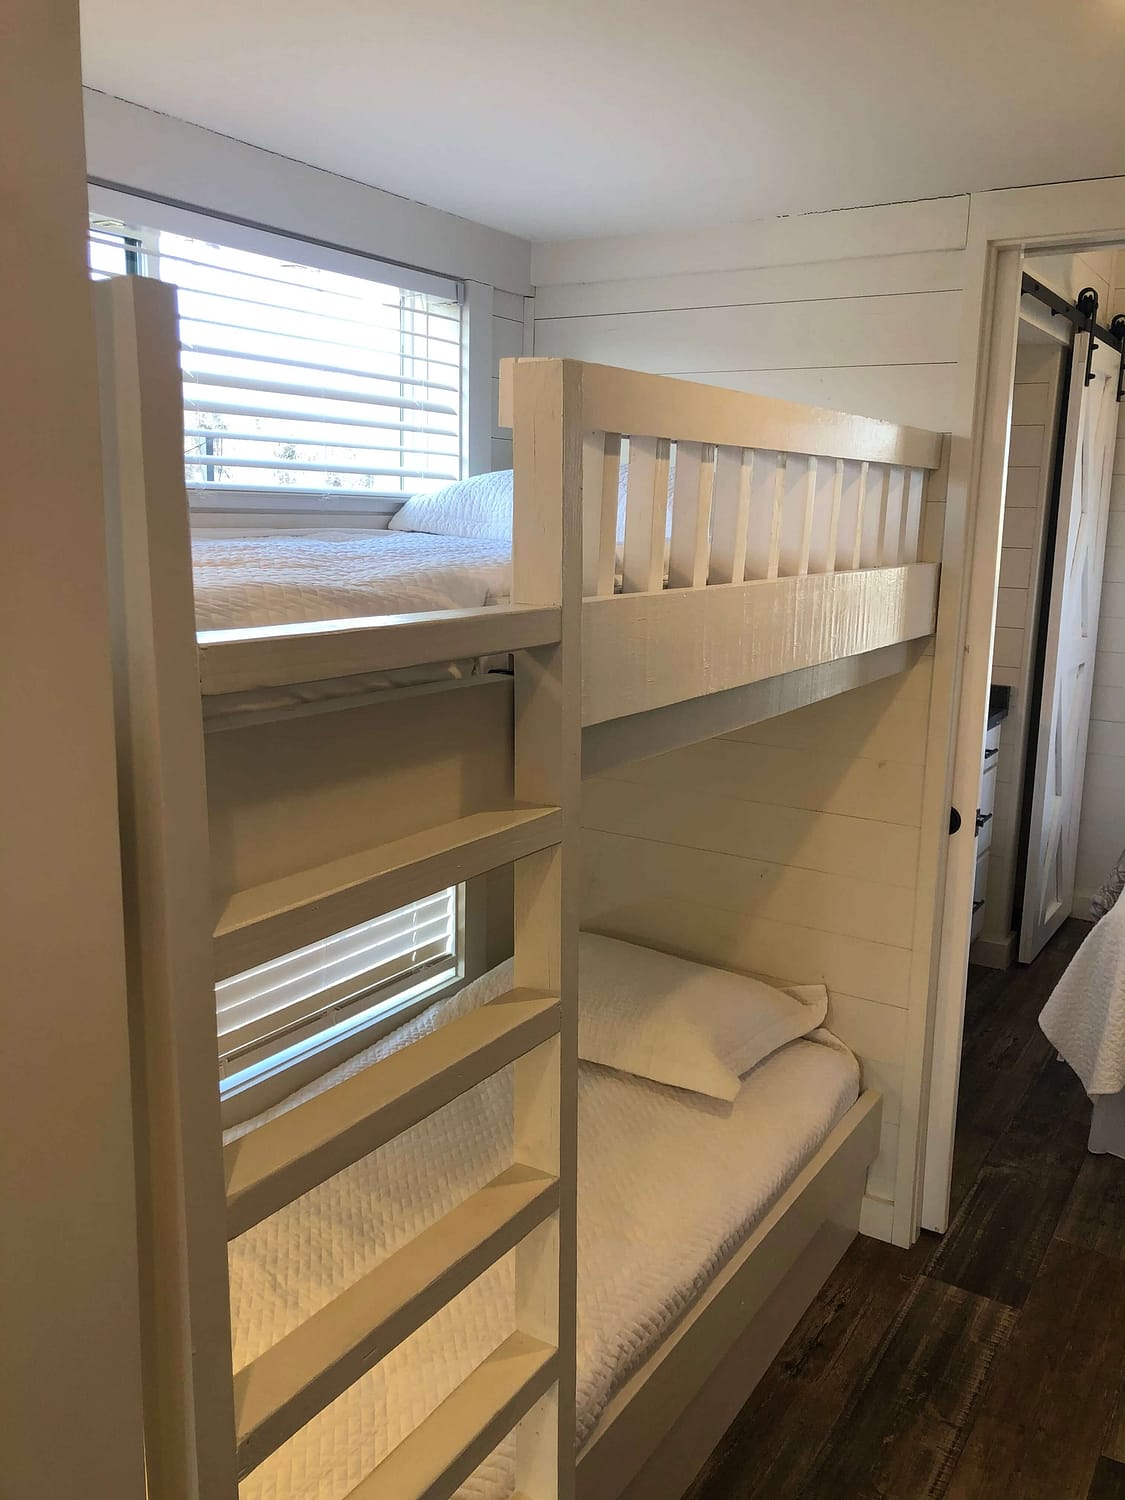 double deck beds